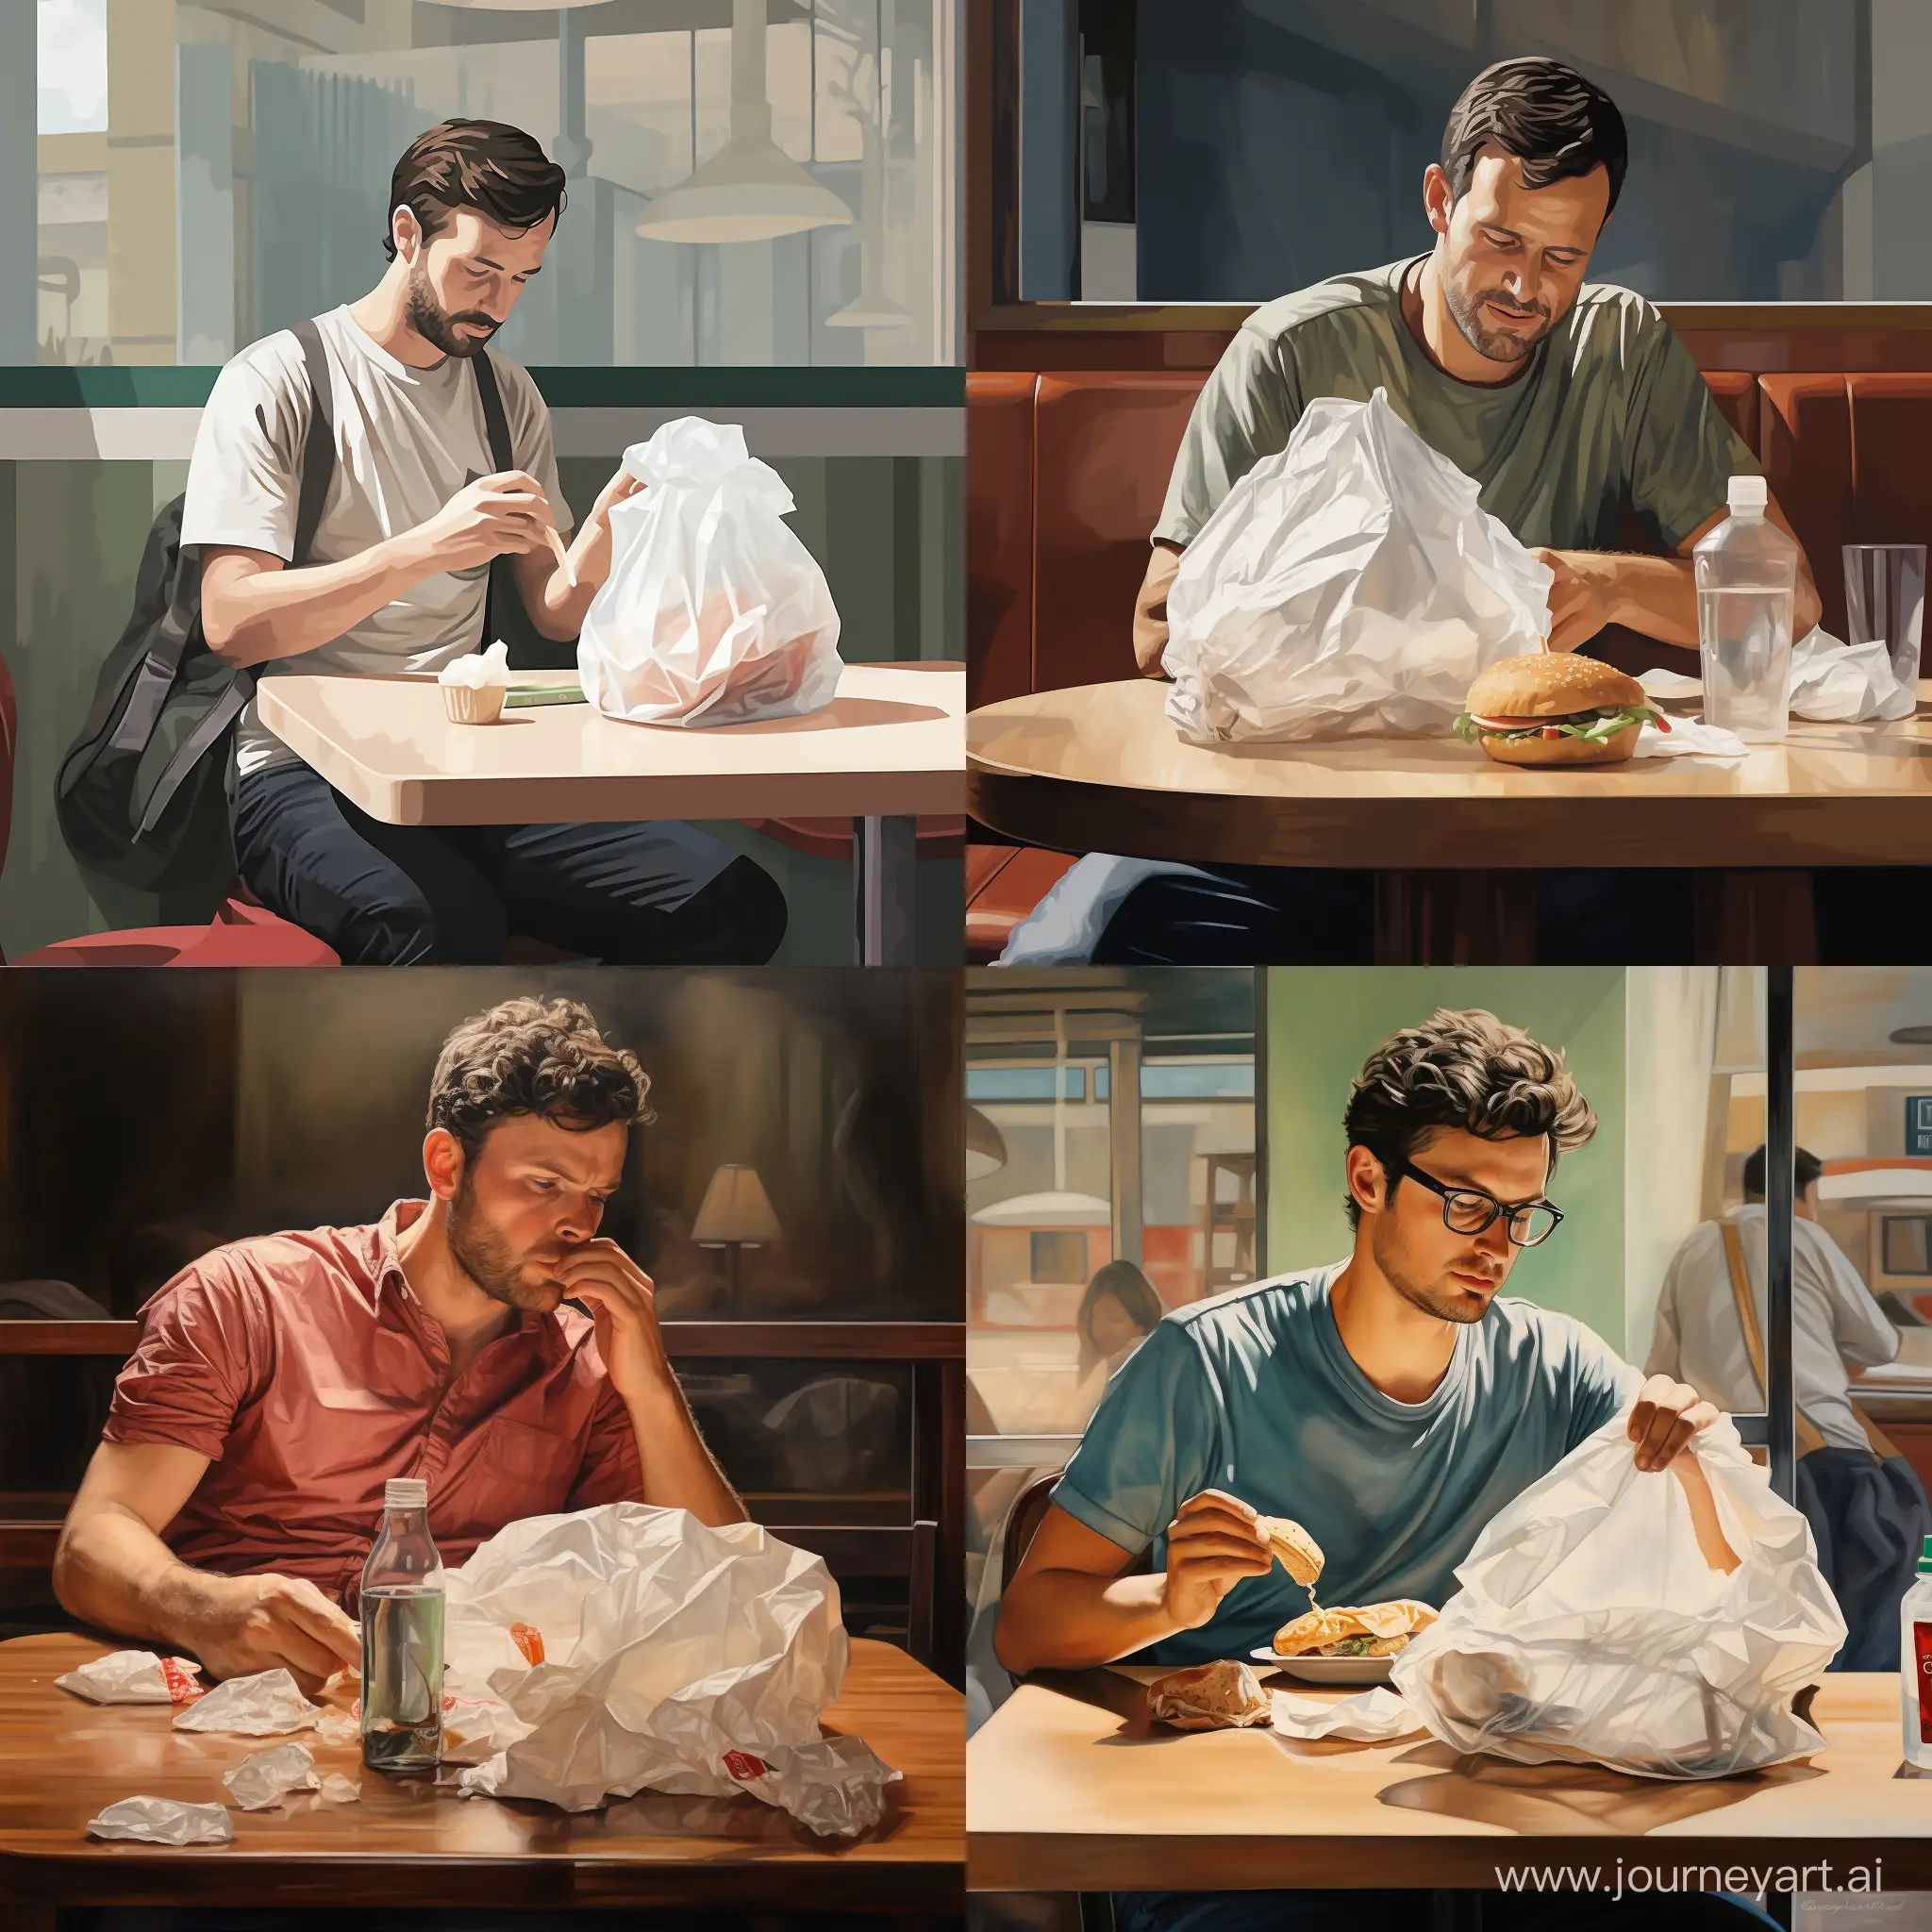 An eye-catching visual depicting a man seated at a table, seemingly ready to enjoy a classic hamburger. However, the unexpected twist reveals that the hamburger has been replaced with a plastic bag. The man, unaware of the switch, takes a bite into the plastic bag, emphasizing the inadvertent consumption of plastic in our daily lives. The image aims to convey the surprising reality of plastic on the plate, sparking reflection on the hidden presence of microplastics in our food choices.
